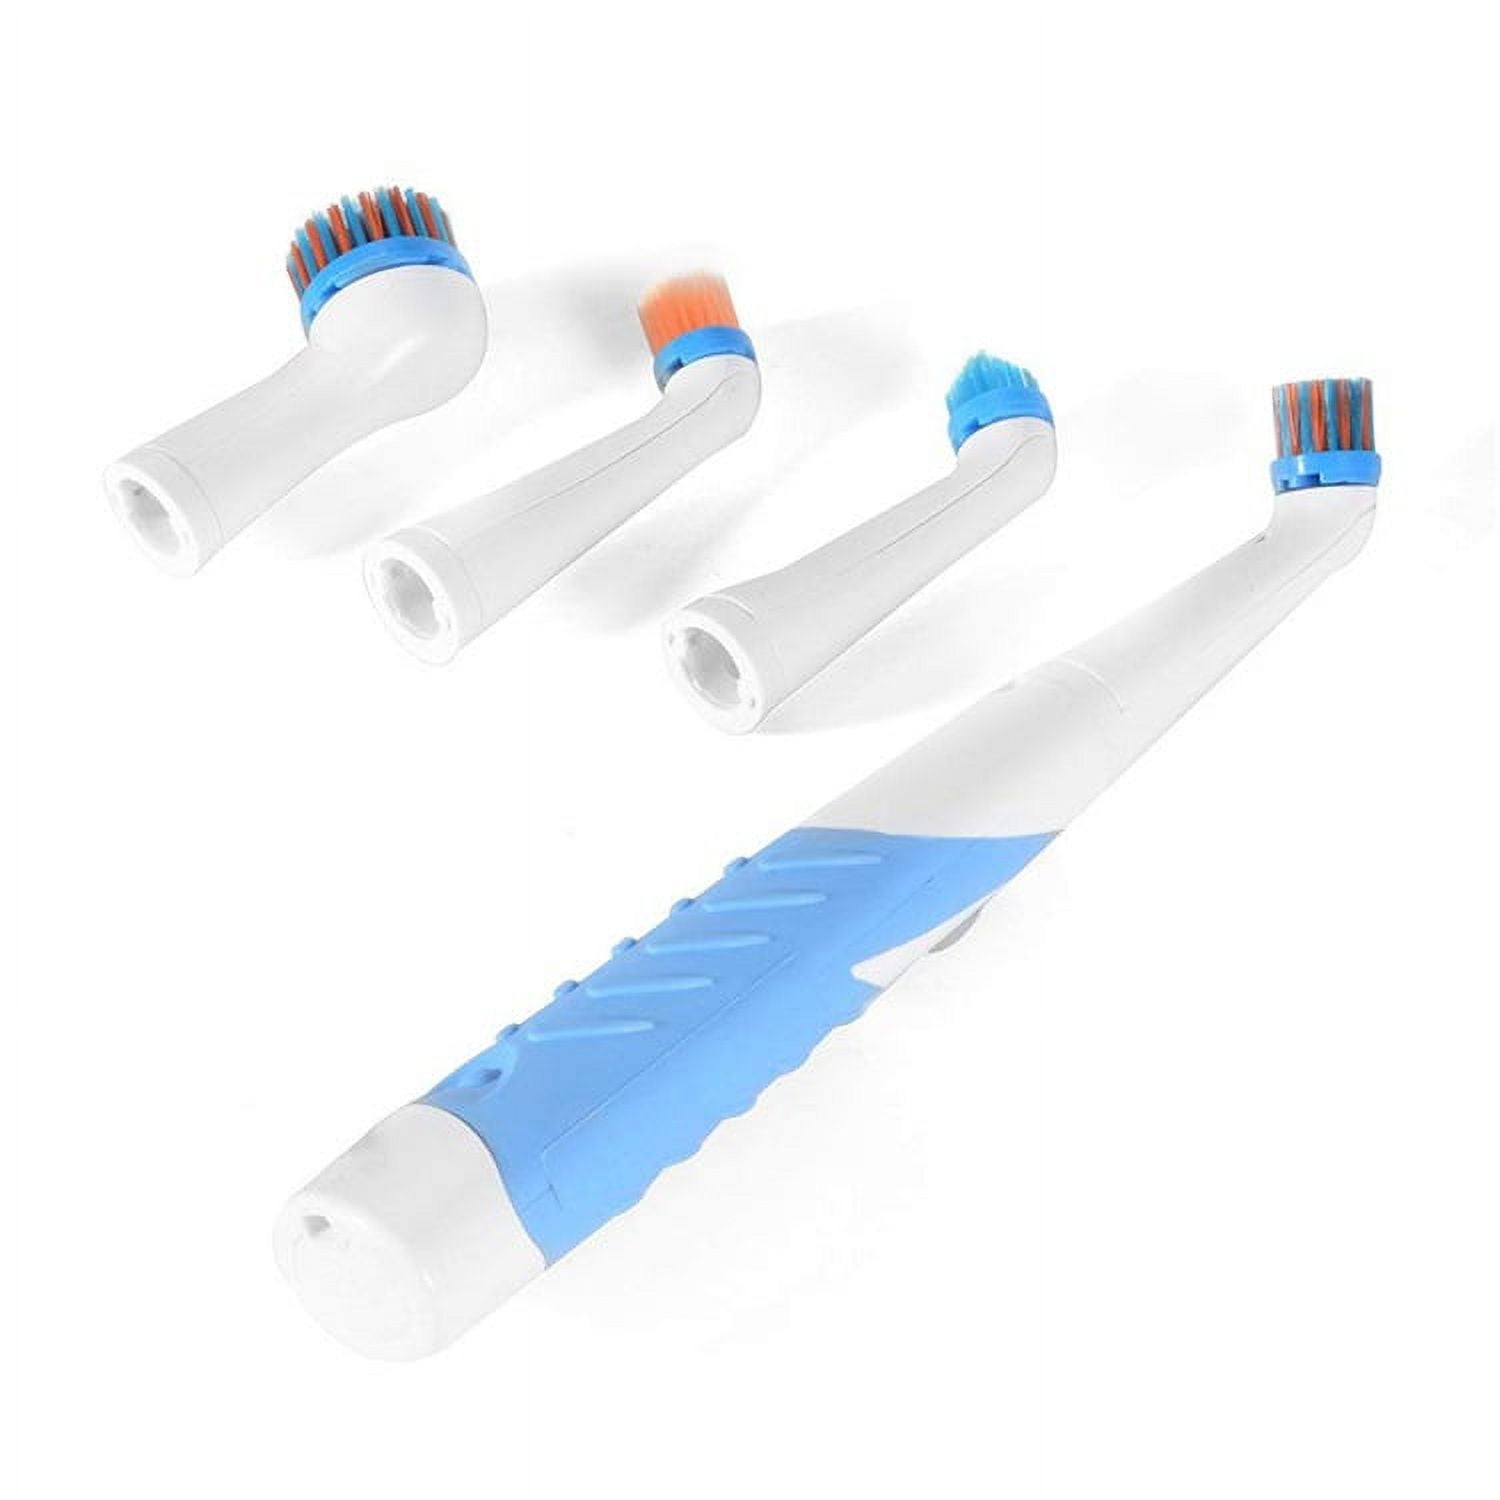 Buy Orange Electric Household Handheld Cleaner Battery Operated High-speed Cleaning  Brush with 4 Interchangeable Brush Heads (4xAA Batteries Not Included) at  ShopLC.